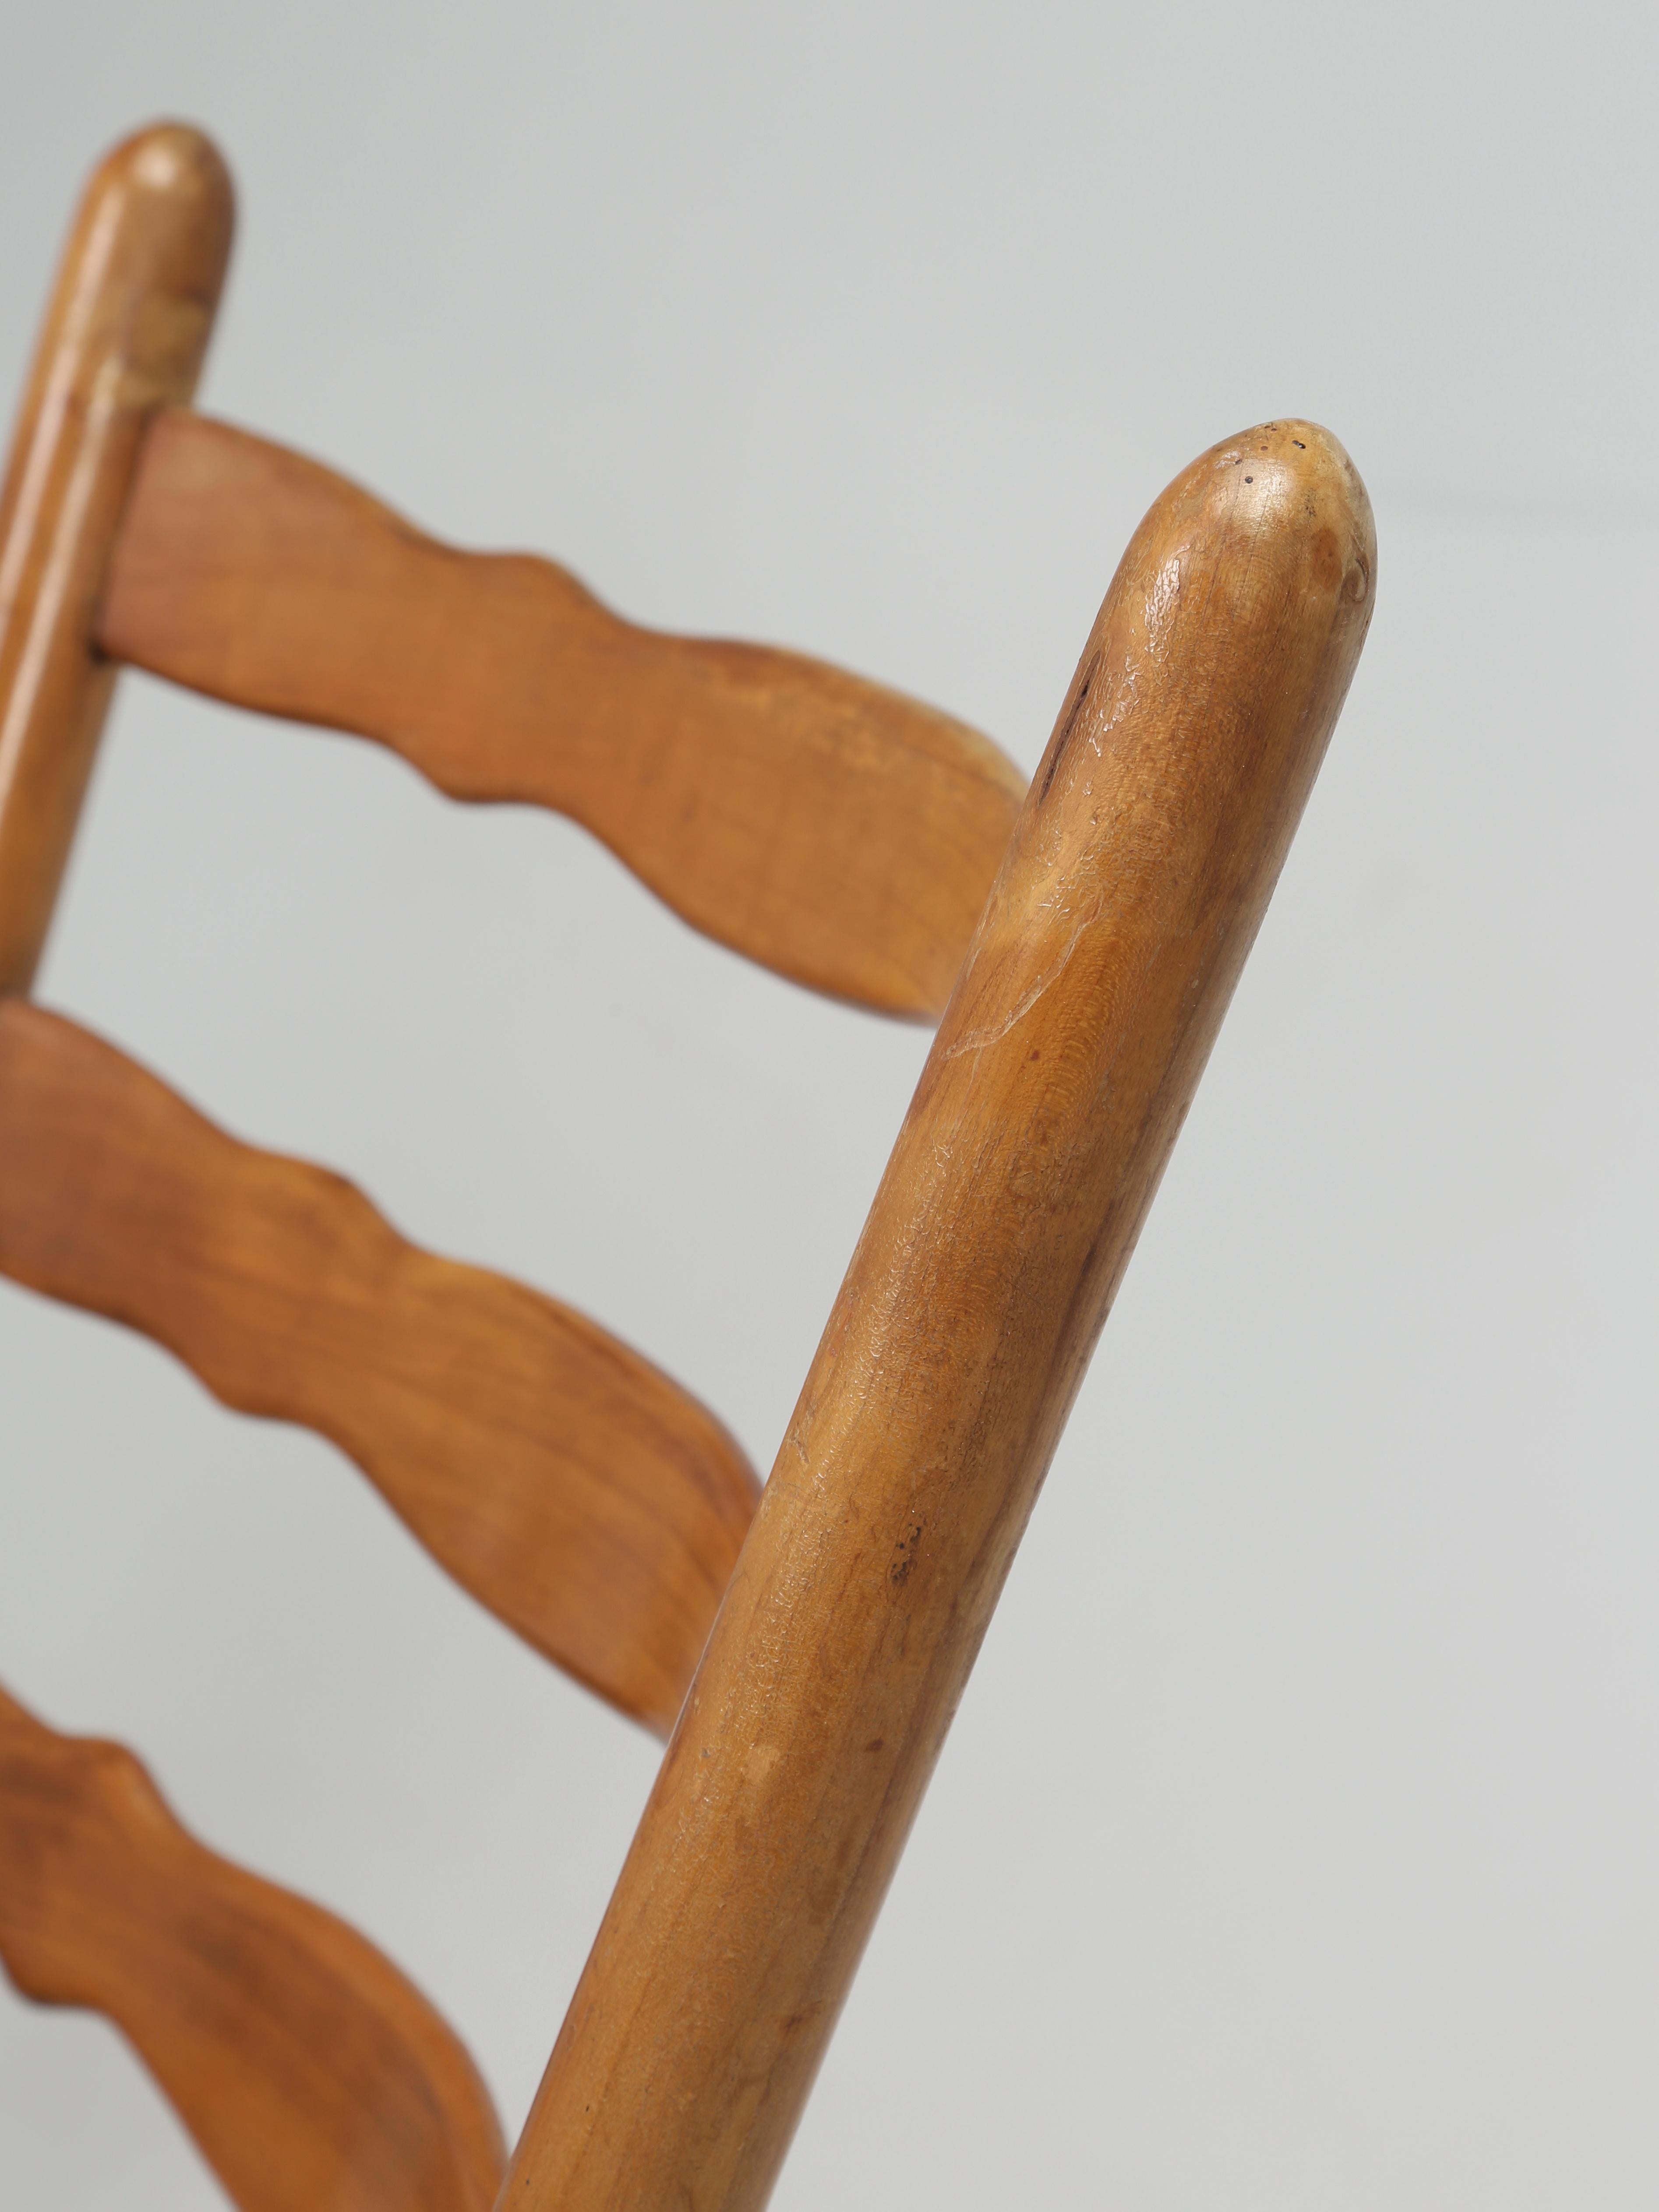 Hand-Crafted Scandinavian Mid-Century Modern Pair of Chairs Unrestored Condition, circa 1960s For Sale